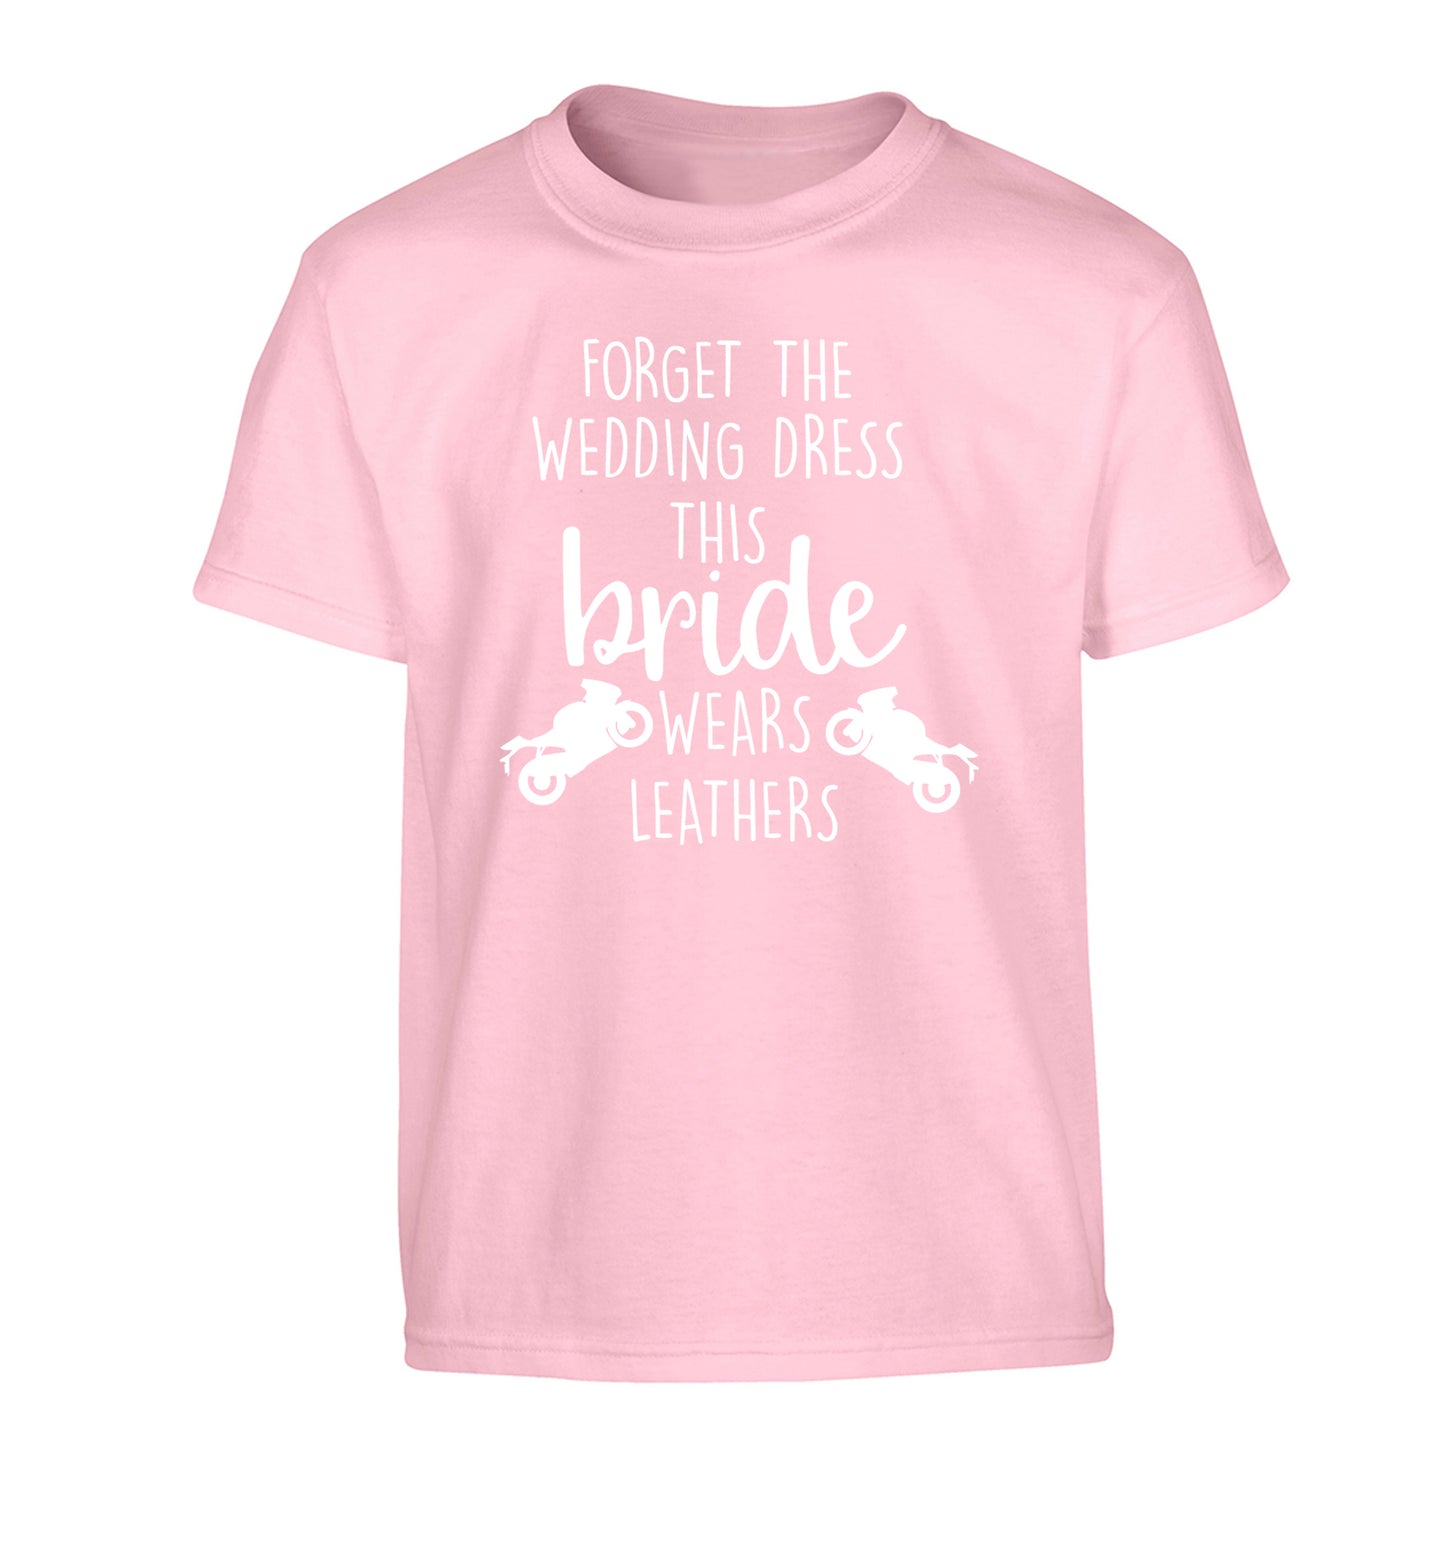 Forget the wedding dress this bride wears leathers Children's light pink Tshirt 12-13 Years